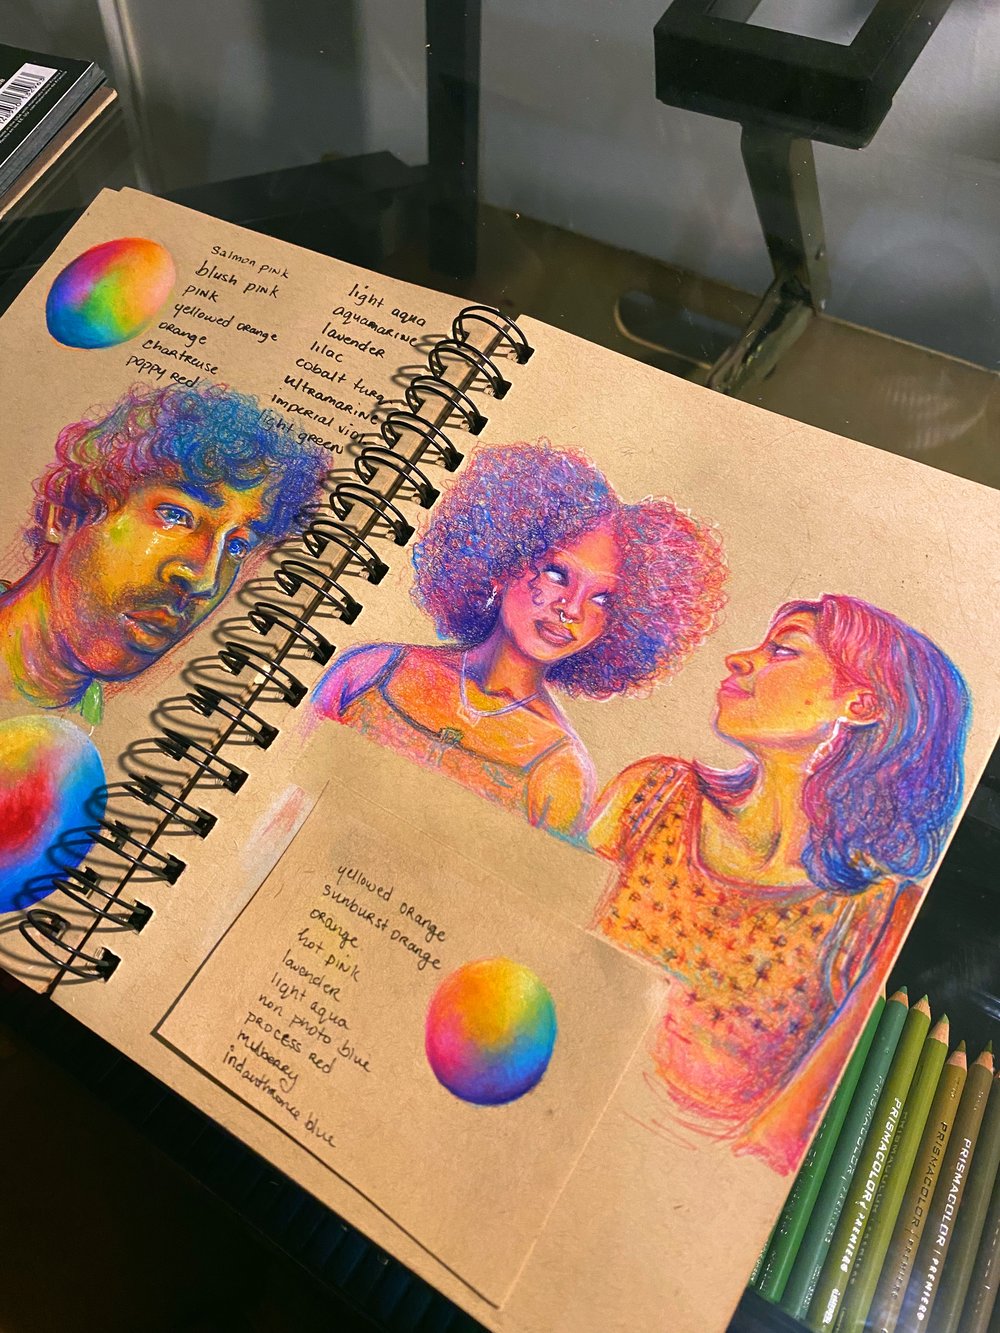 Tale of two lovers: color study